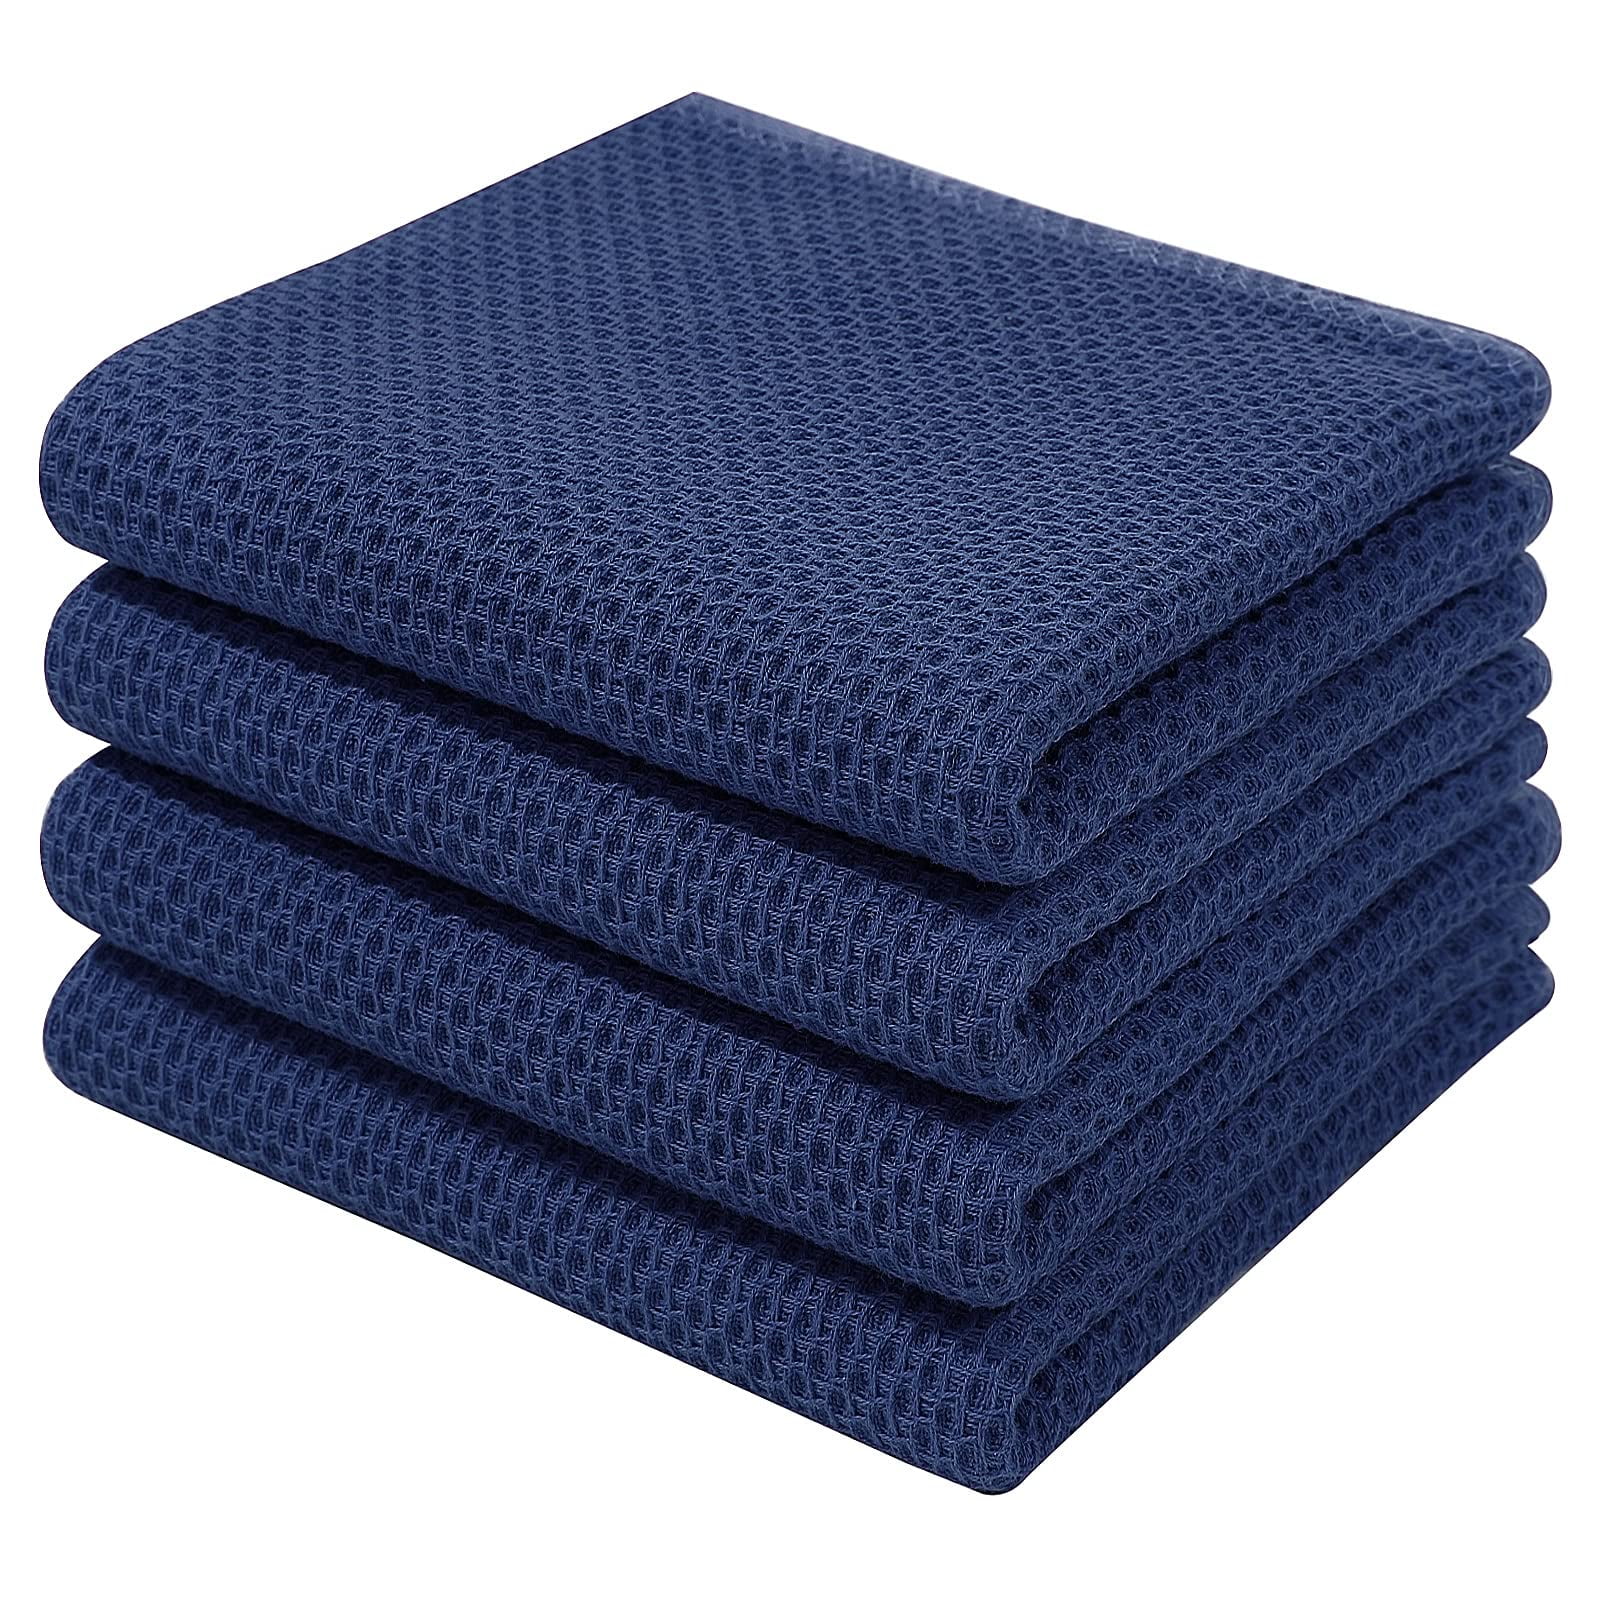 PY HOME & SPORTS Dish Towel Set, 100% Cotton Waffle Weave Kitchen Towels 4  Pieces, Super Absorbent (17 x 25 Inches, Set of 4)